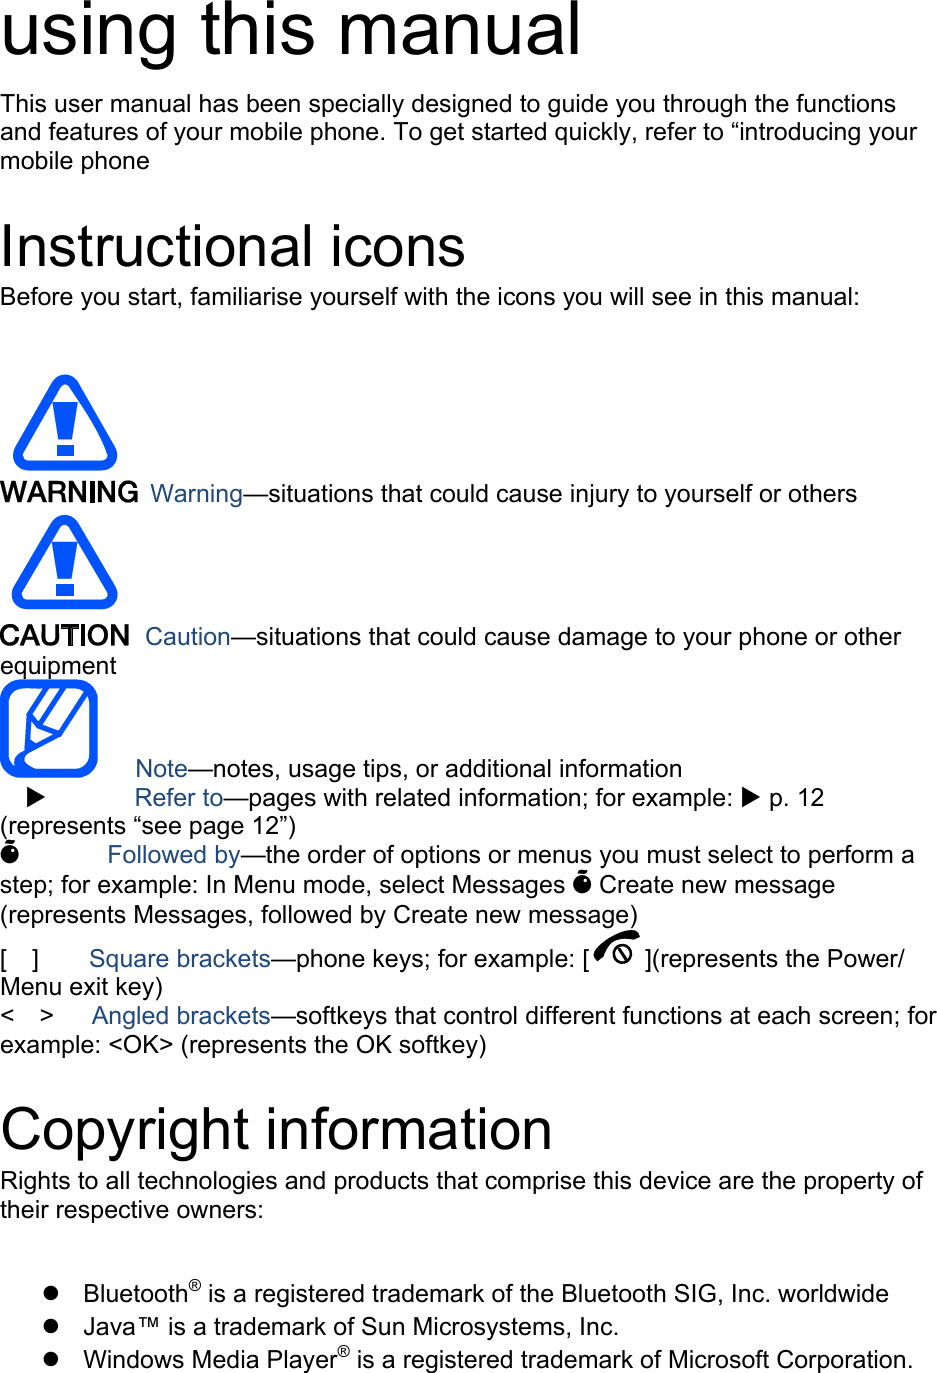 using this manual This user manual has been specially designed to guide you through the functions and features of your mobile phone. To get started quickly, refer to “introducing your mobile phone  Instructional icons Before you start, familiarise yourself with the icons you will see in this manual:     Warning—situations that could cause injury to yourself or others  Caution—situations that could cause damage to your phone or other equipment    Note—notes, usage tips, or additional information   X       Refer to—pages with related information; for example: X p. 12 (represents “see page 12”) Õ       Followed by—the order of options or menus you must select to perform a step; for example: In Menu mode, select Messages Õ Create new message (represents Messages, followed by Create new message) [  ]    Square brackets—phone keys; for example: [ ](represents the Power/ Menu exit key) &lt;  &gt;   Angled brackets—softkeys that control different functions at each screen; for example: &lt;OK&gt; (represents the OK softkey)  Copyright information Rights to all technologies and products that comprise this device are the property of their respective owners:  z Bluetooth® is a registered trademark of the Bluetooth SIG, Inc. worldwide z  Java™ is a trademark of Sun Microsystems, Inc. z Windows Media Player® is a registered trademark of Microsoft Corporation. 